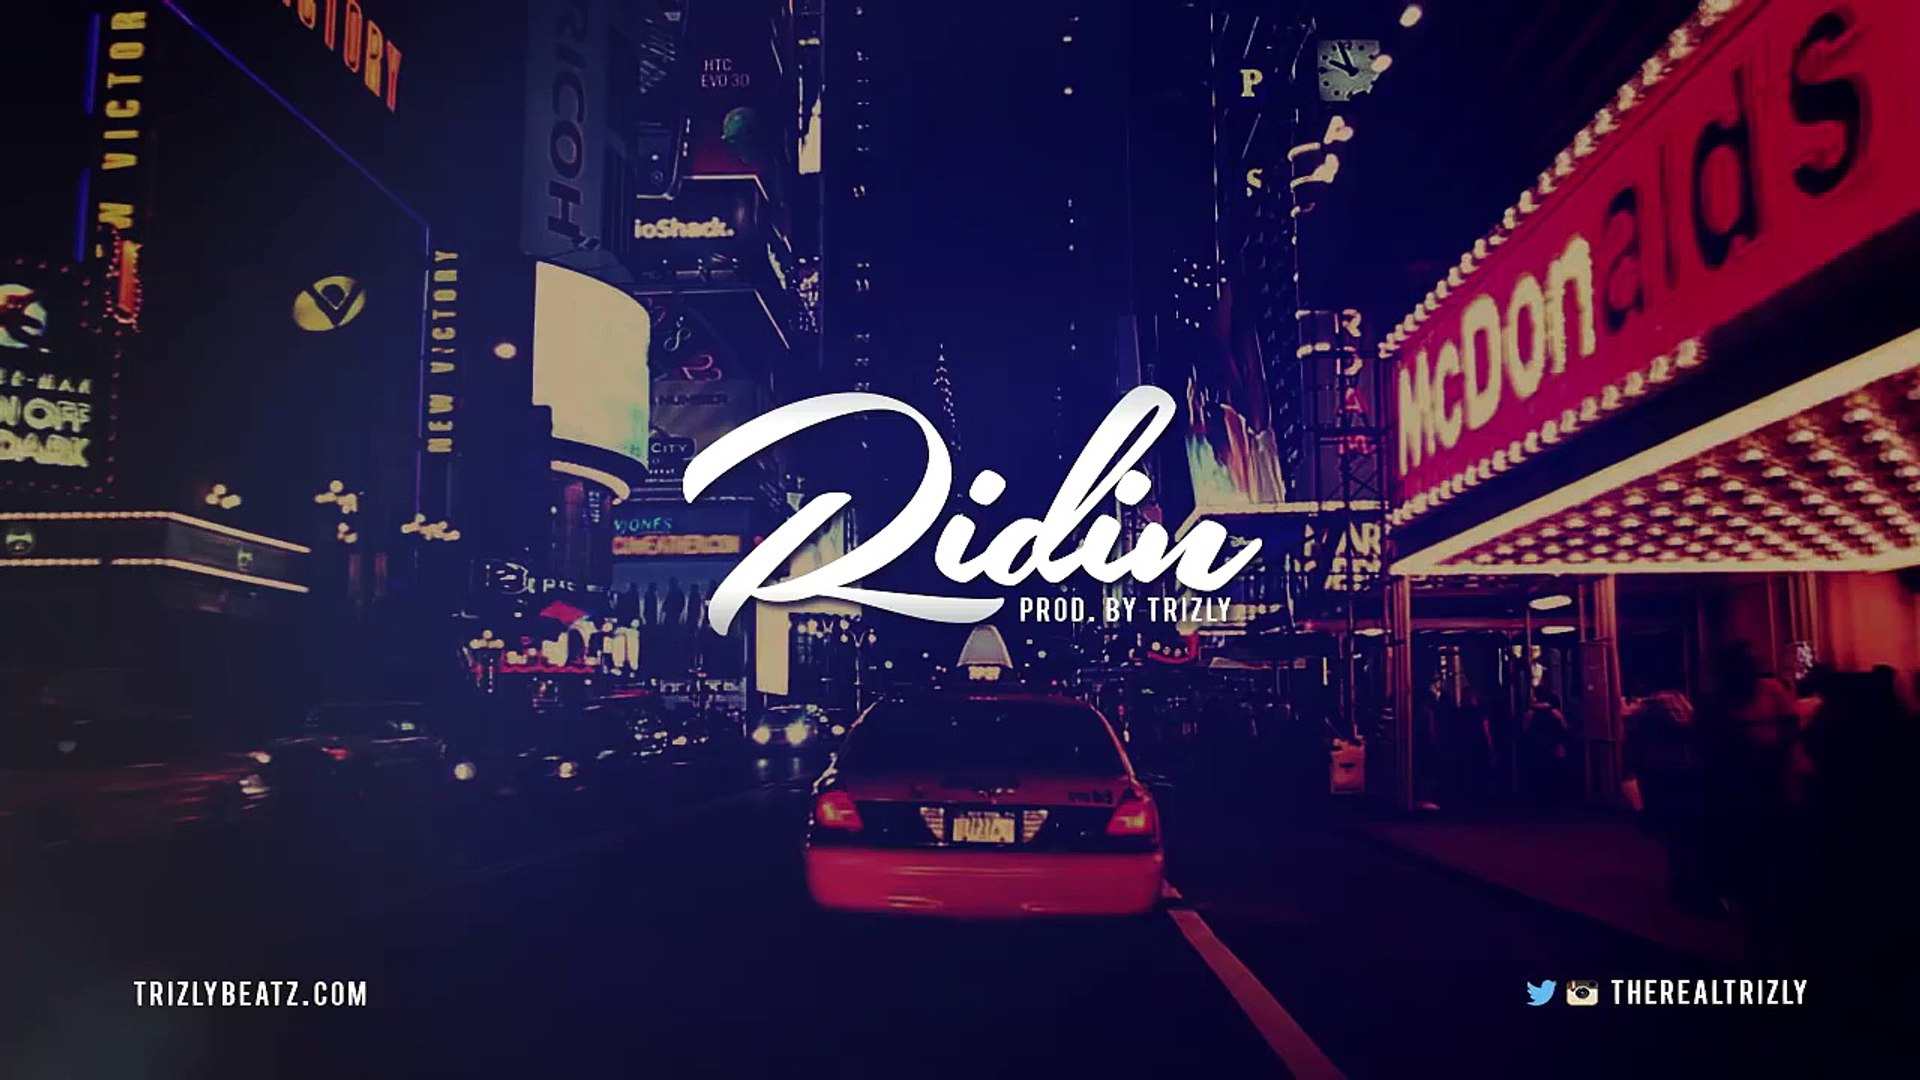 ⁣Lil Mouse x Lil Durk Type Beat Ridin (Prod. By Trizly)